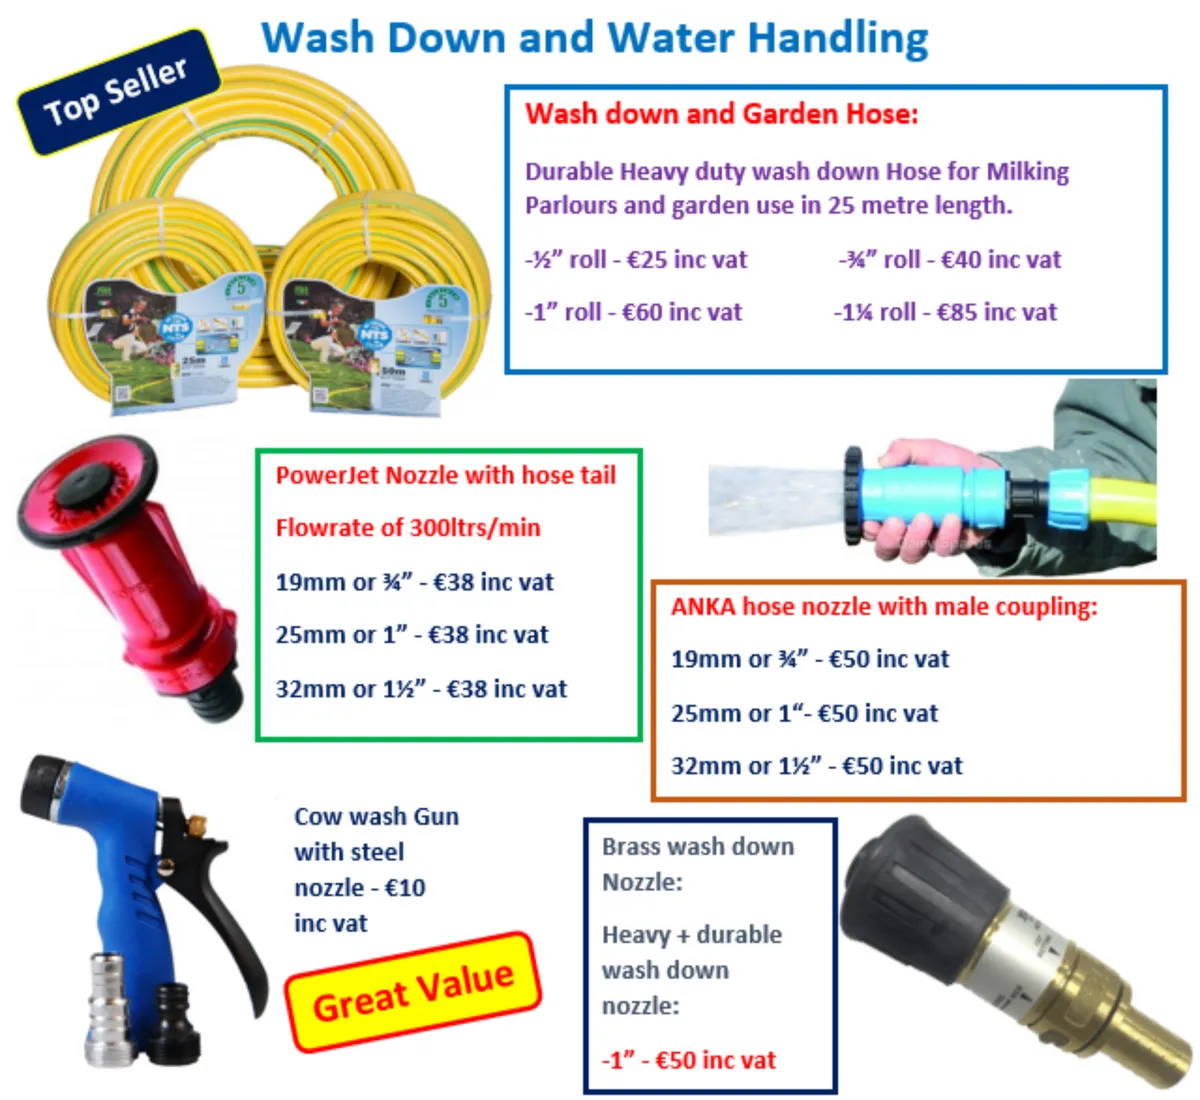 Wash down Hosing, nozzles and accessories for sale